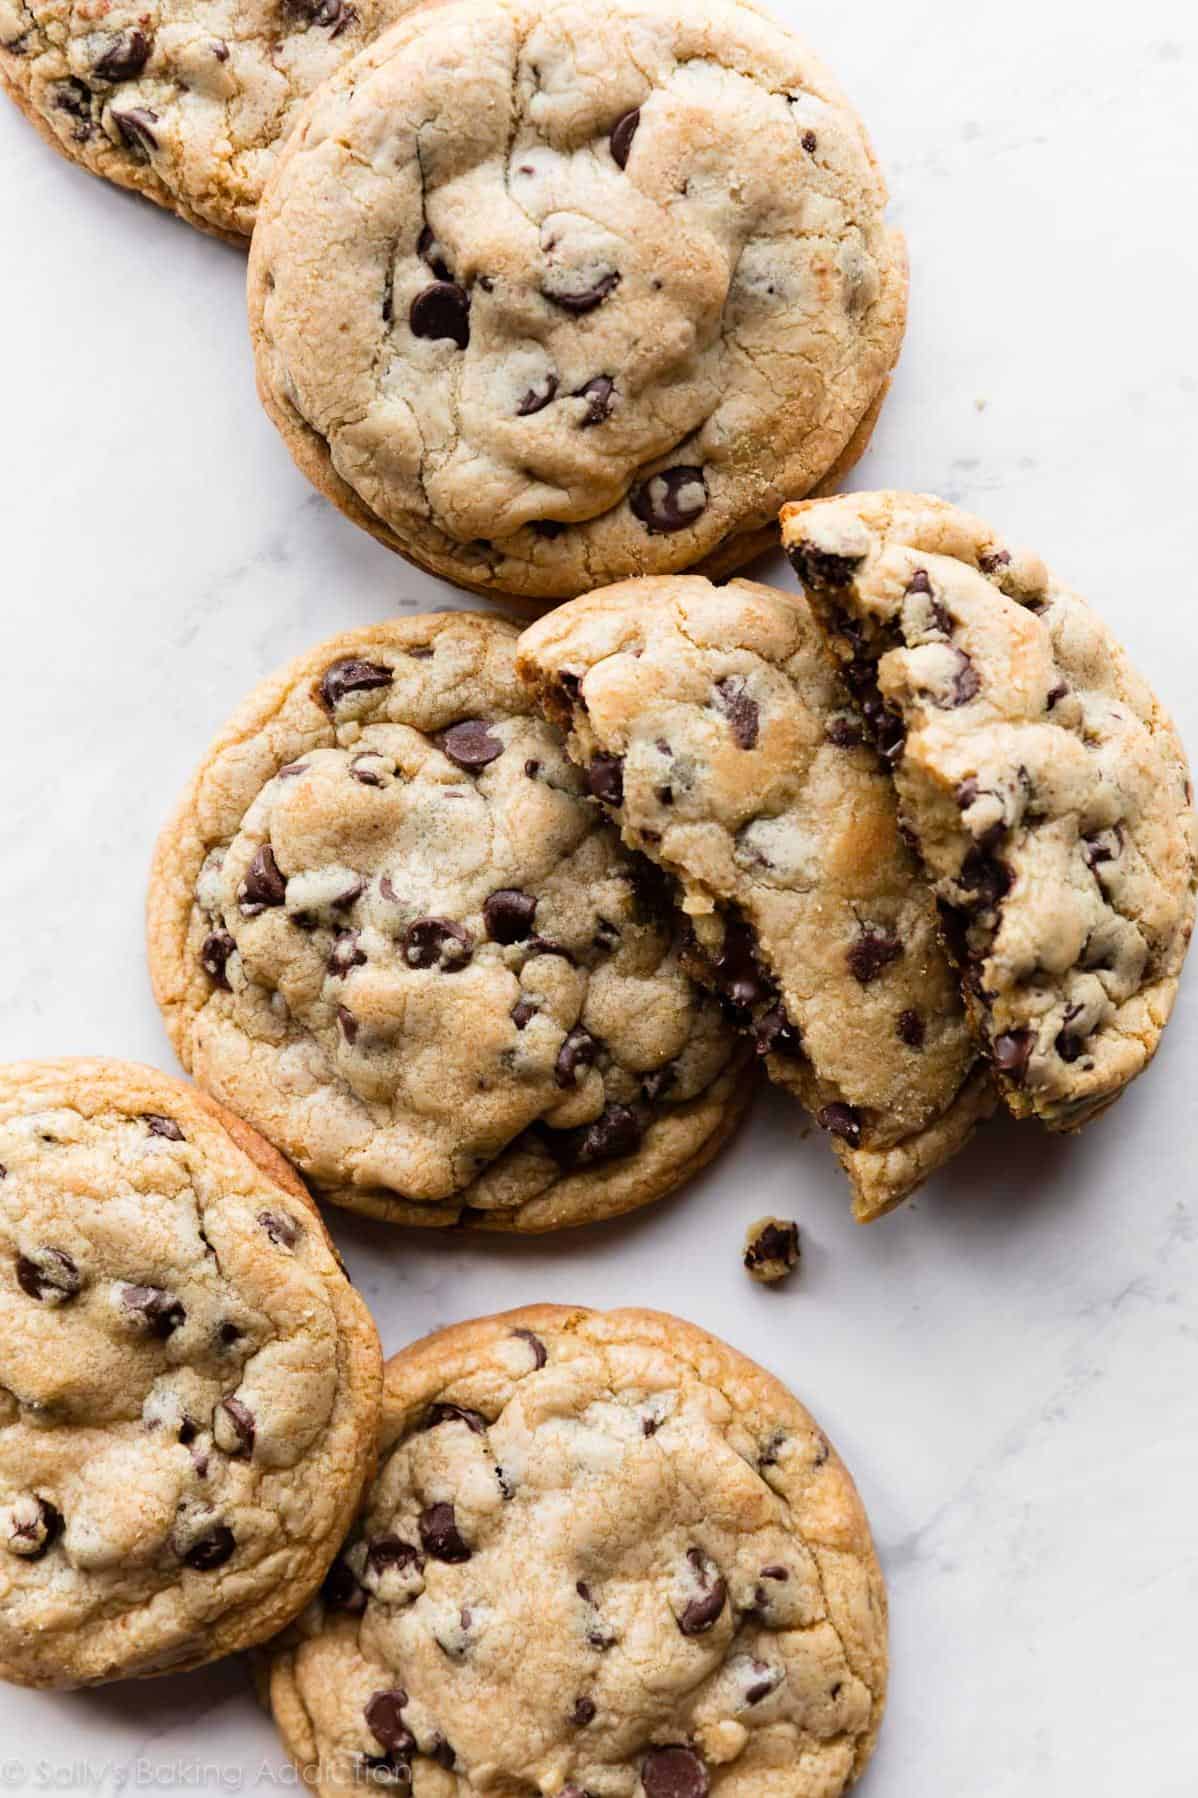  With the perfect balance of sweetness and saltiness, these cookies will satisfy all your cravings!